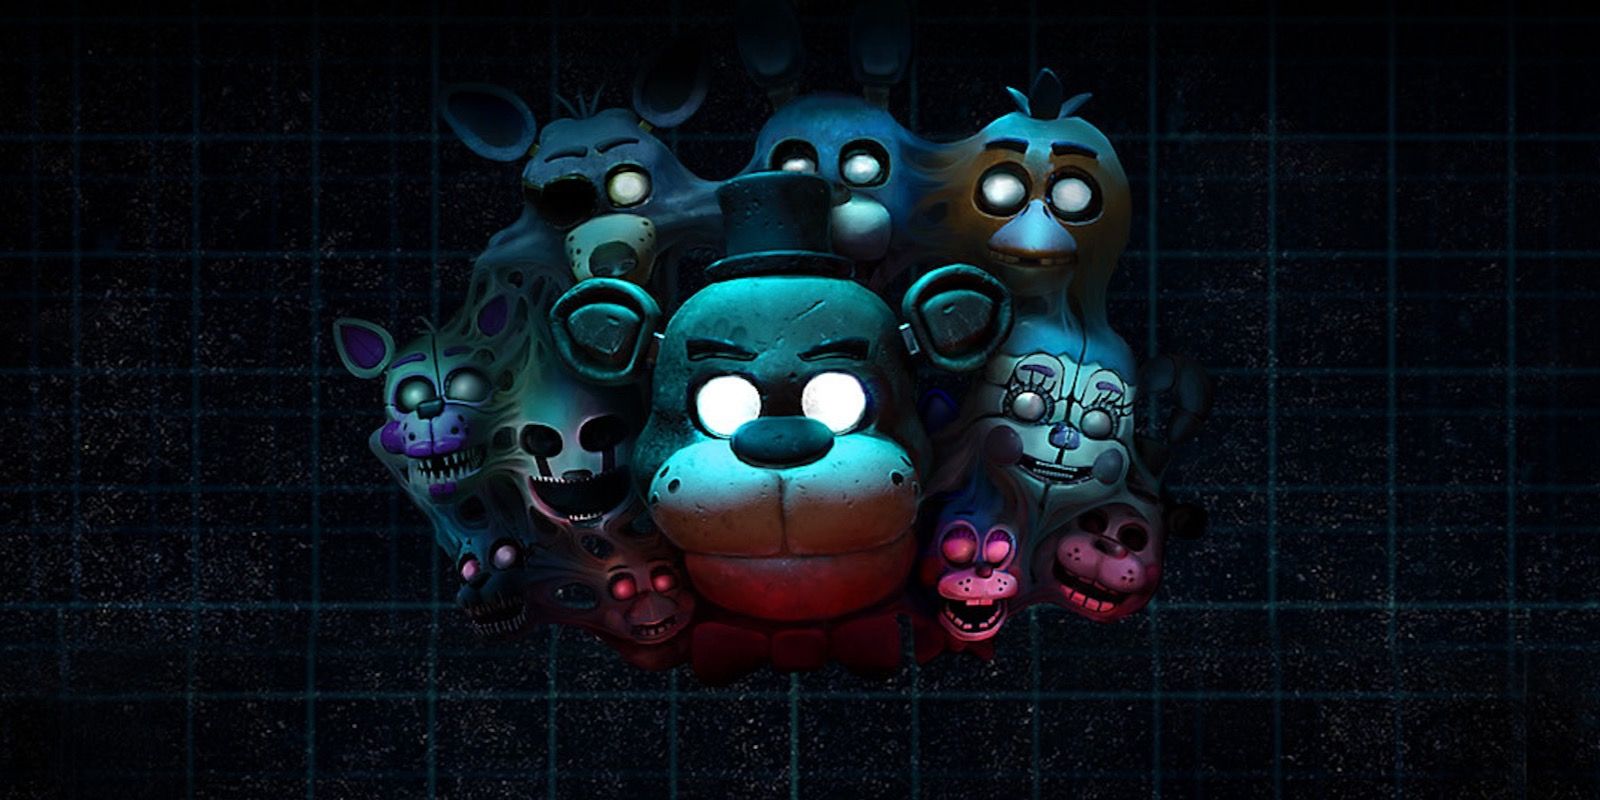 An image of the animatronics from Five Nights at Freddy's, peering out of the shadows